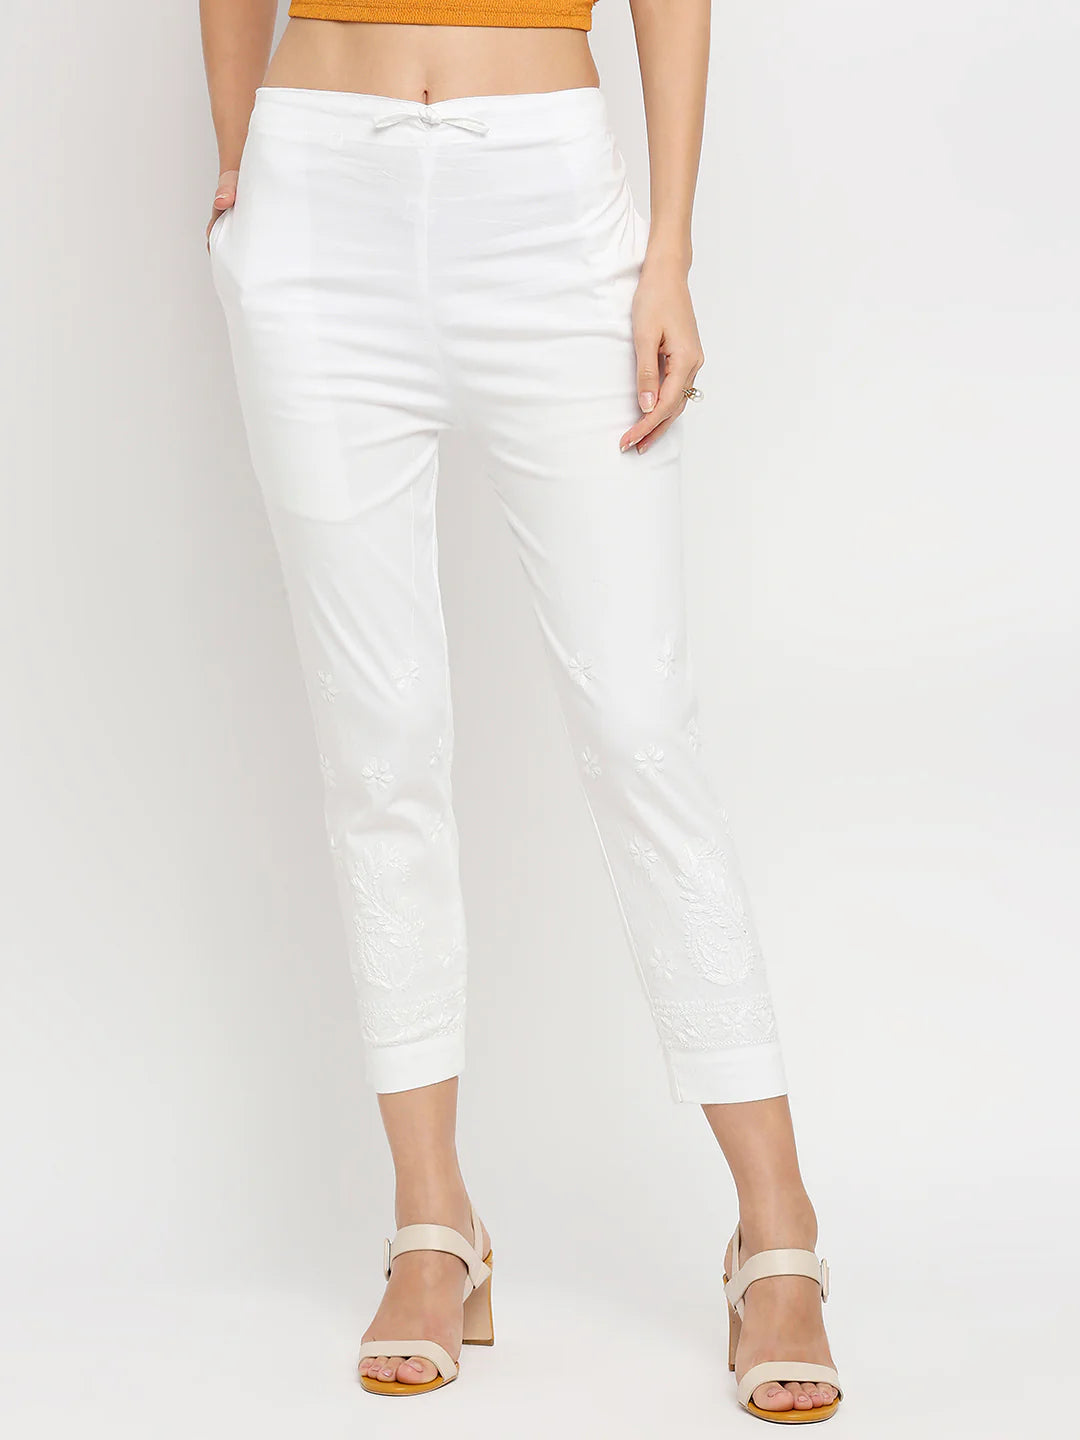 Buy White Solid Pants Online - W for Woman